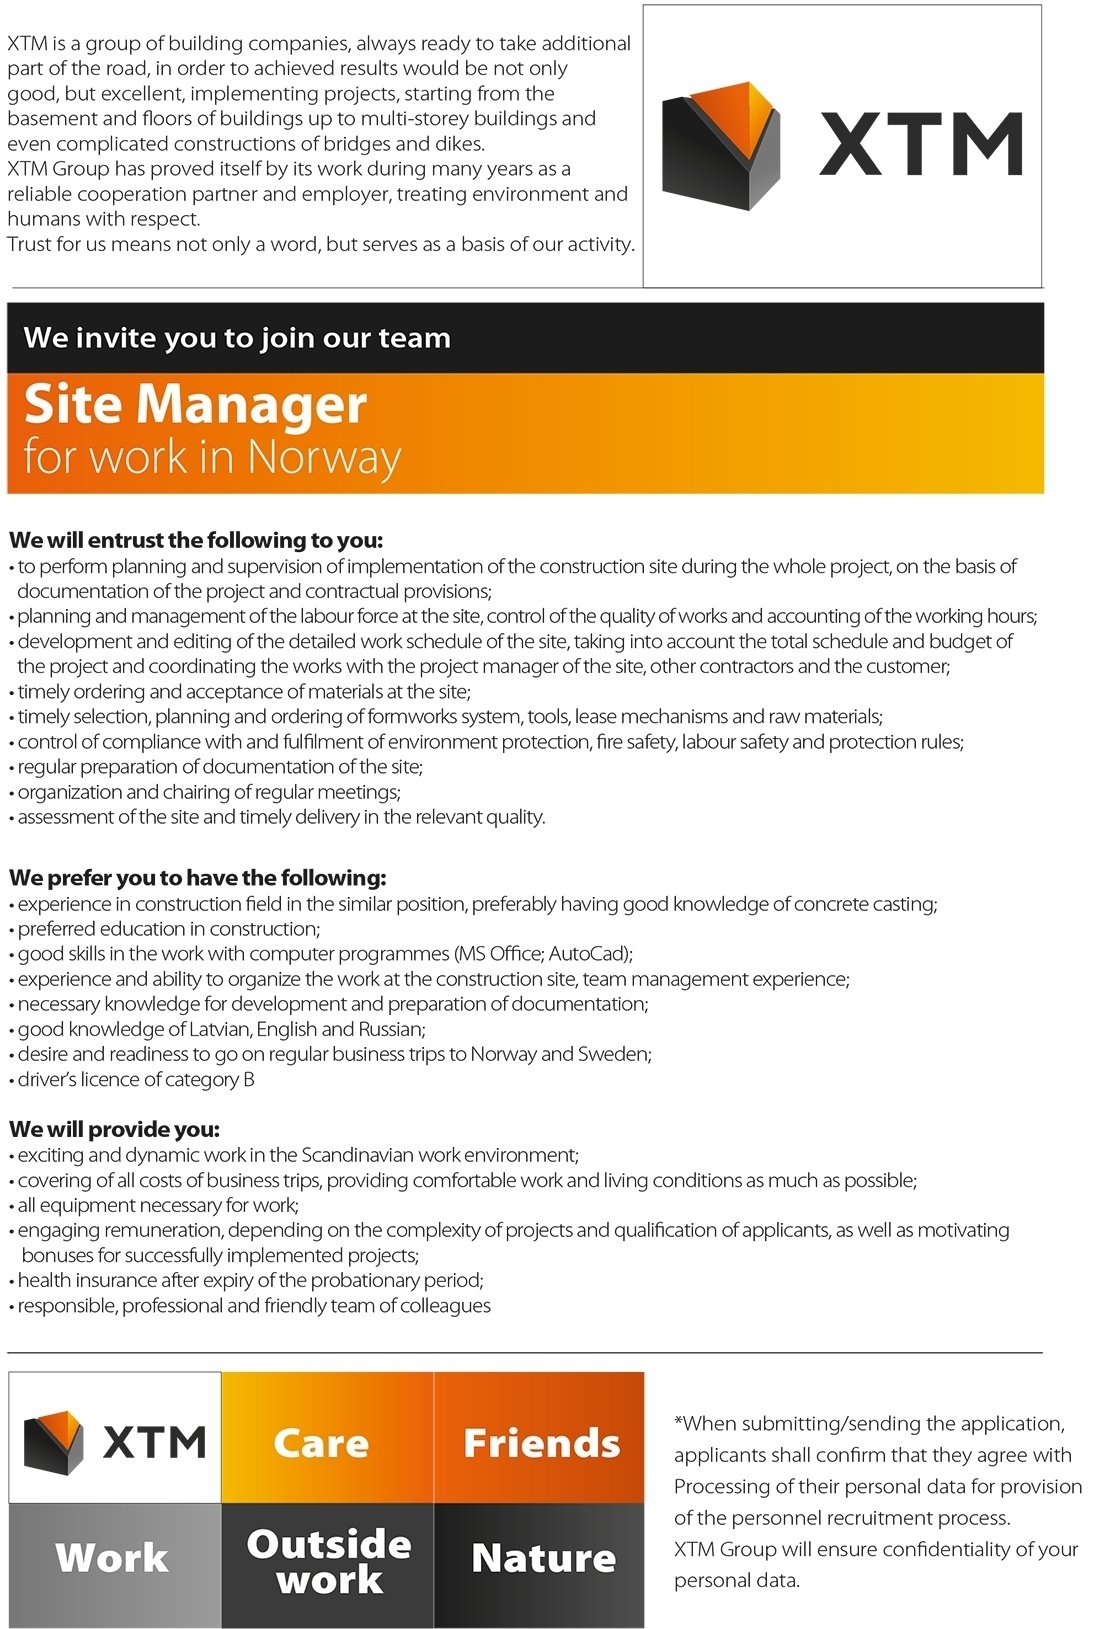 XTM, SIA Site Manager for work in Norway